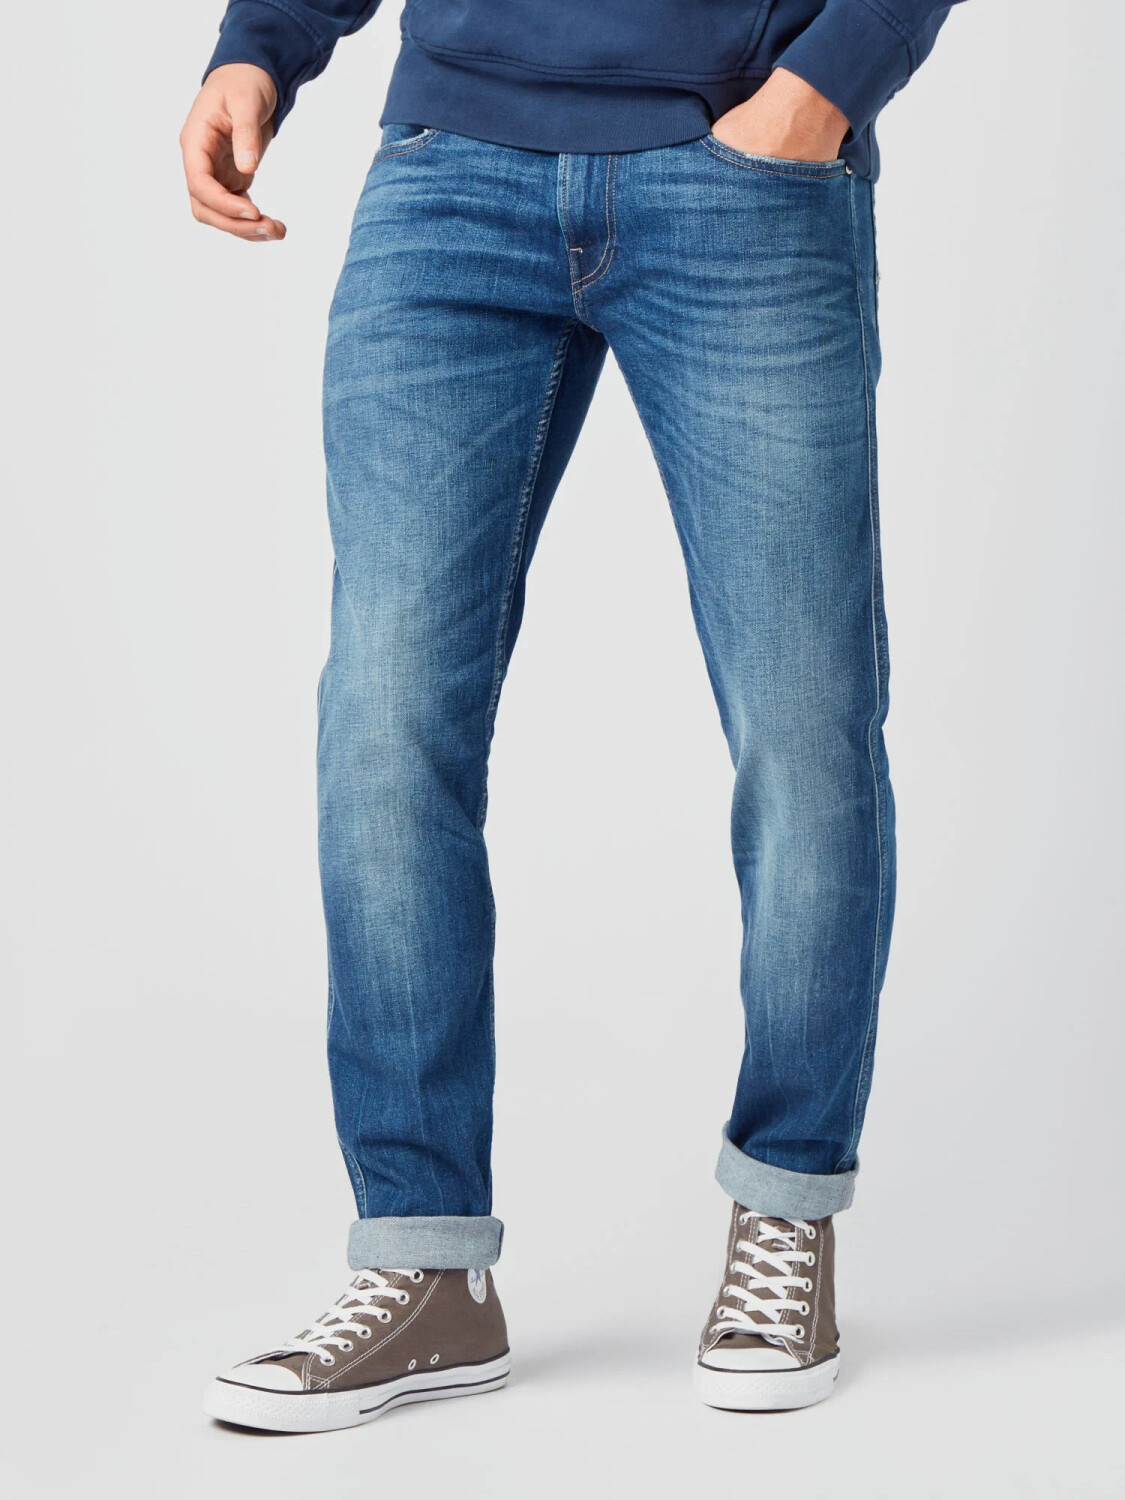 medium Best (Today) Jeans Deals Slim £39.49 Buy Fit from Anbass – on Replay Hyperflex blue